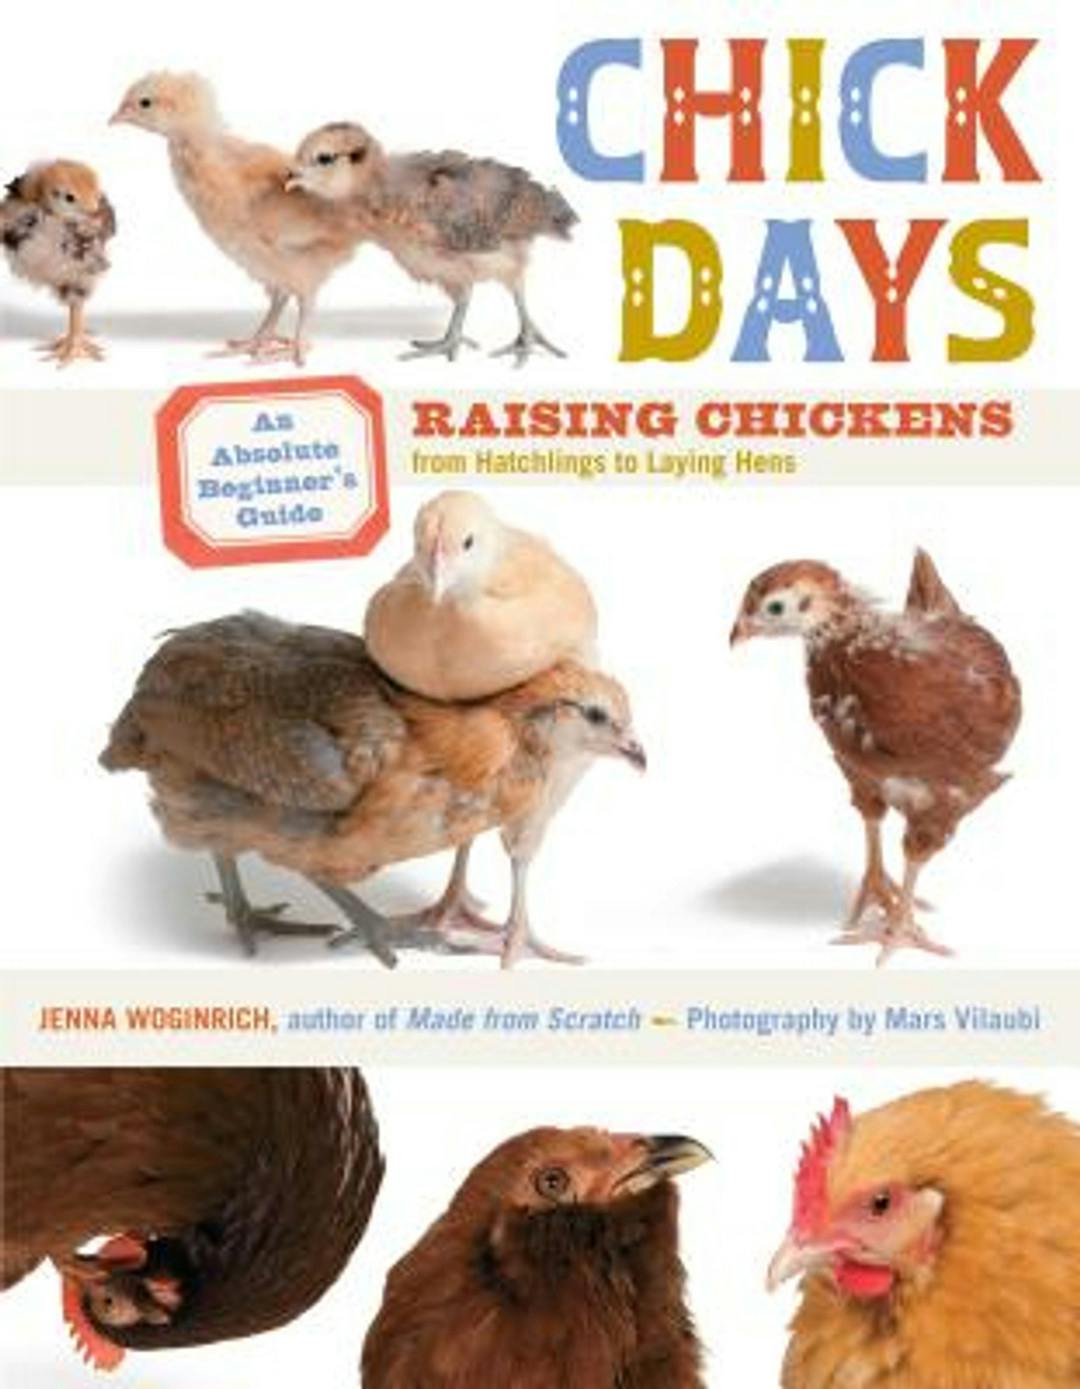 Chick Days: An Absolute Beginners Guide to Raising Chickens from Hatching to Laying